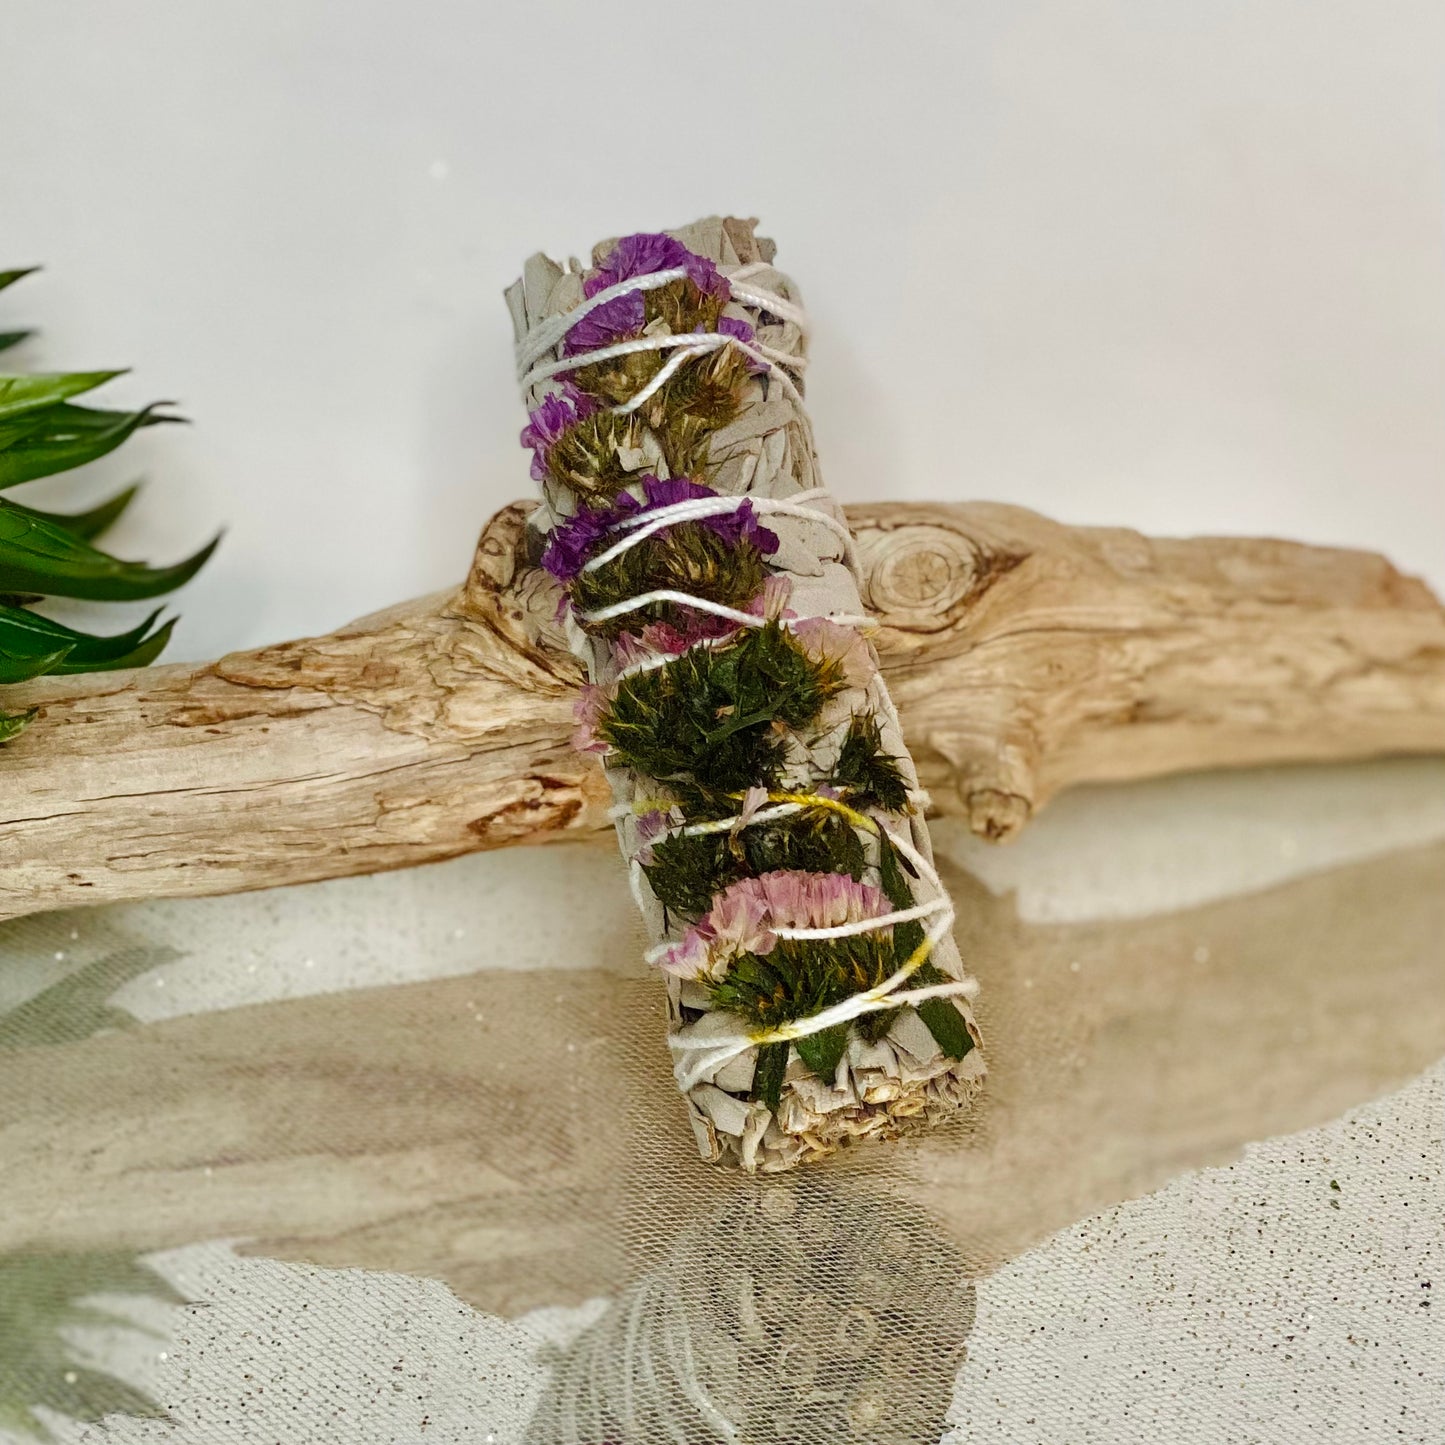 Purple & Pink Flower White Sage Bundle - Energize Your Space with Floral Harmony